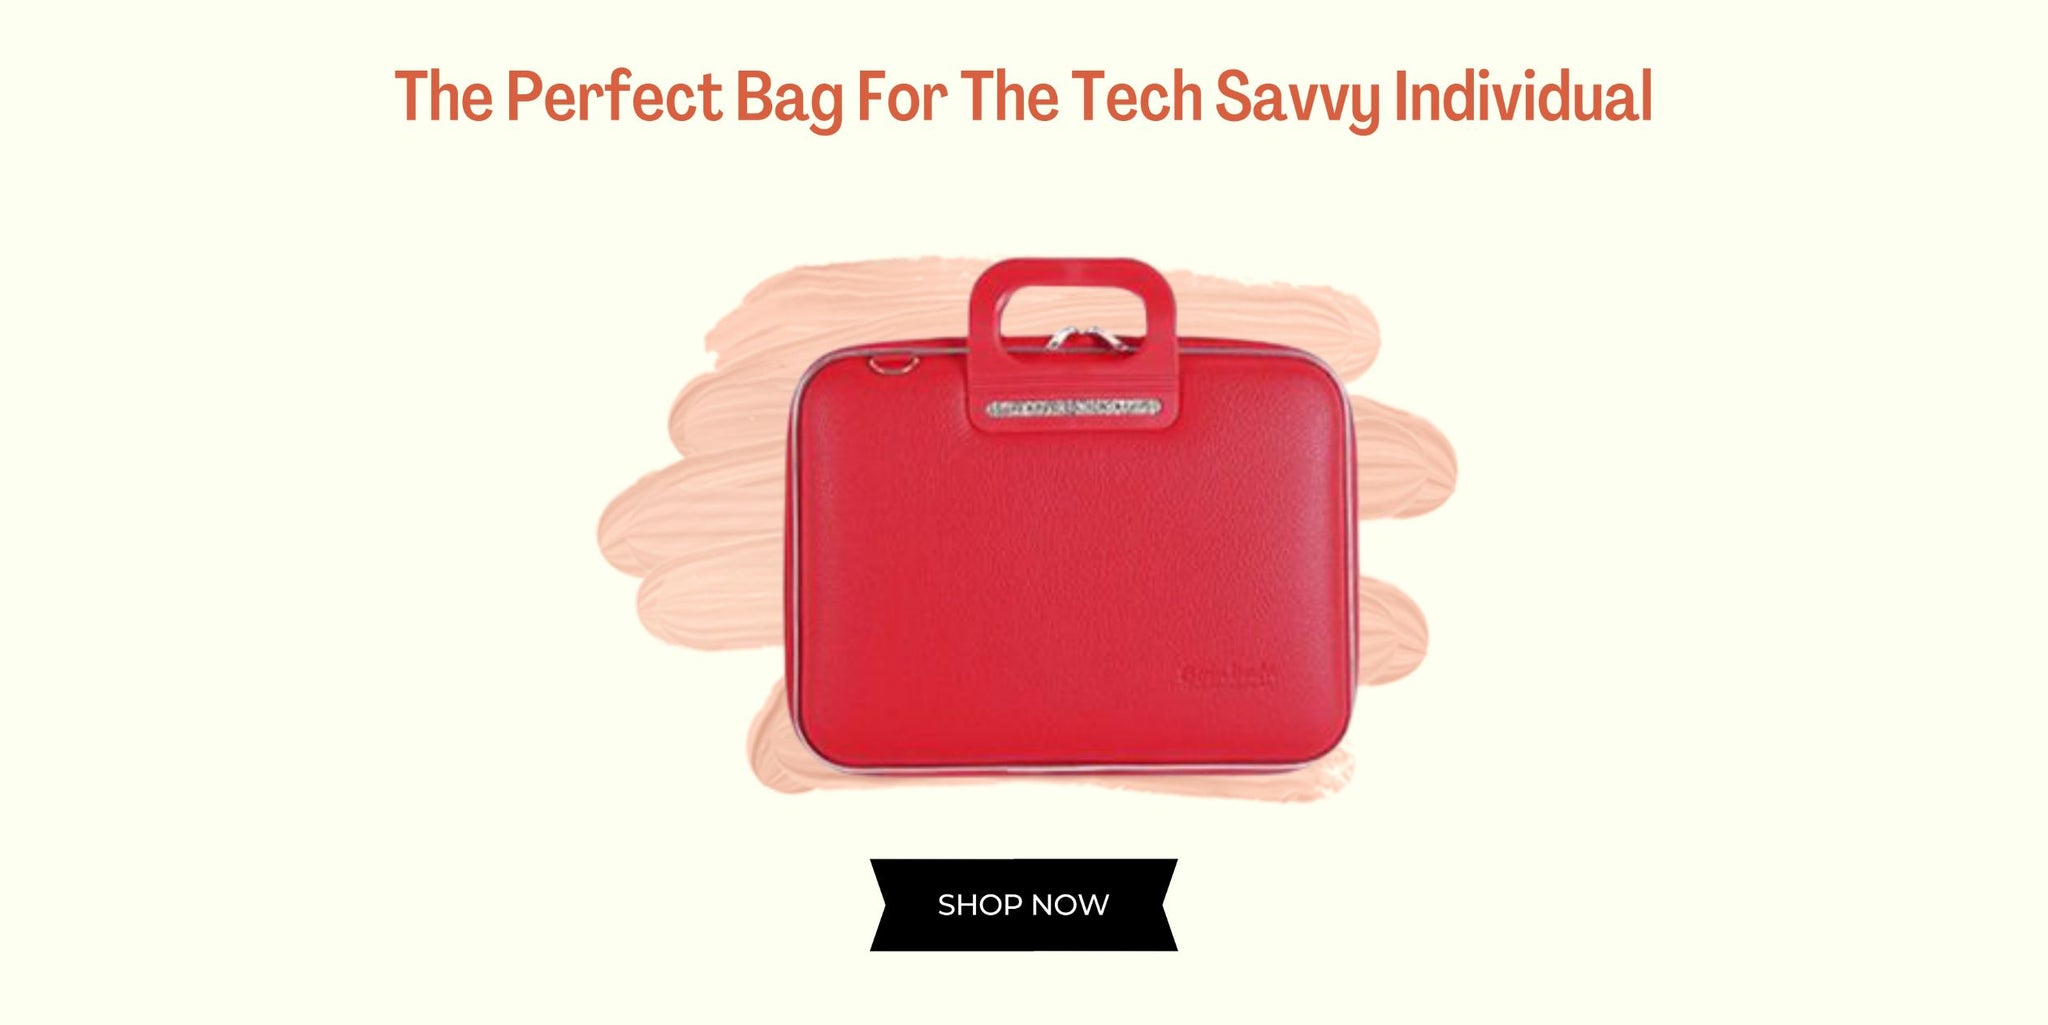 The Perfect Bag For The Tech Savvy Individual